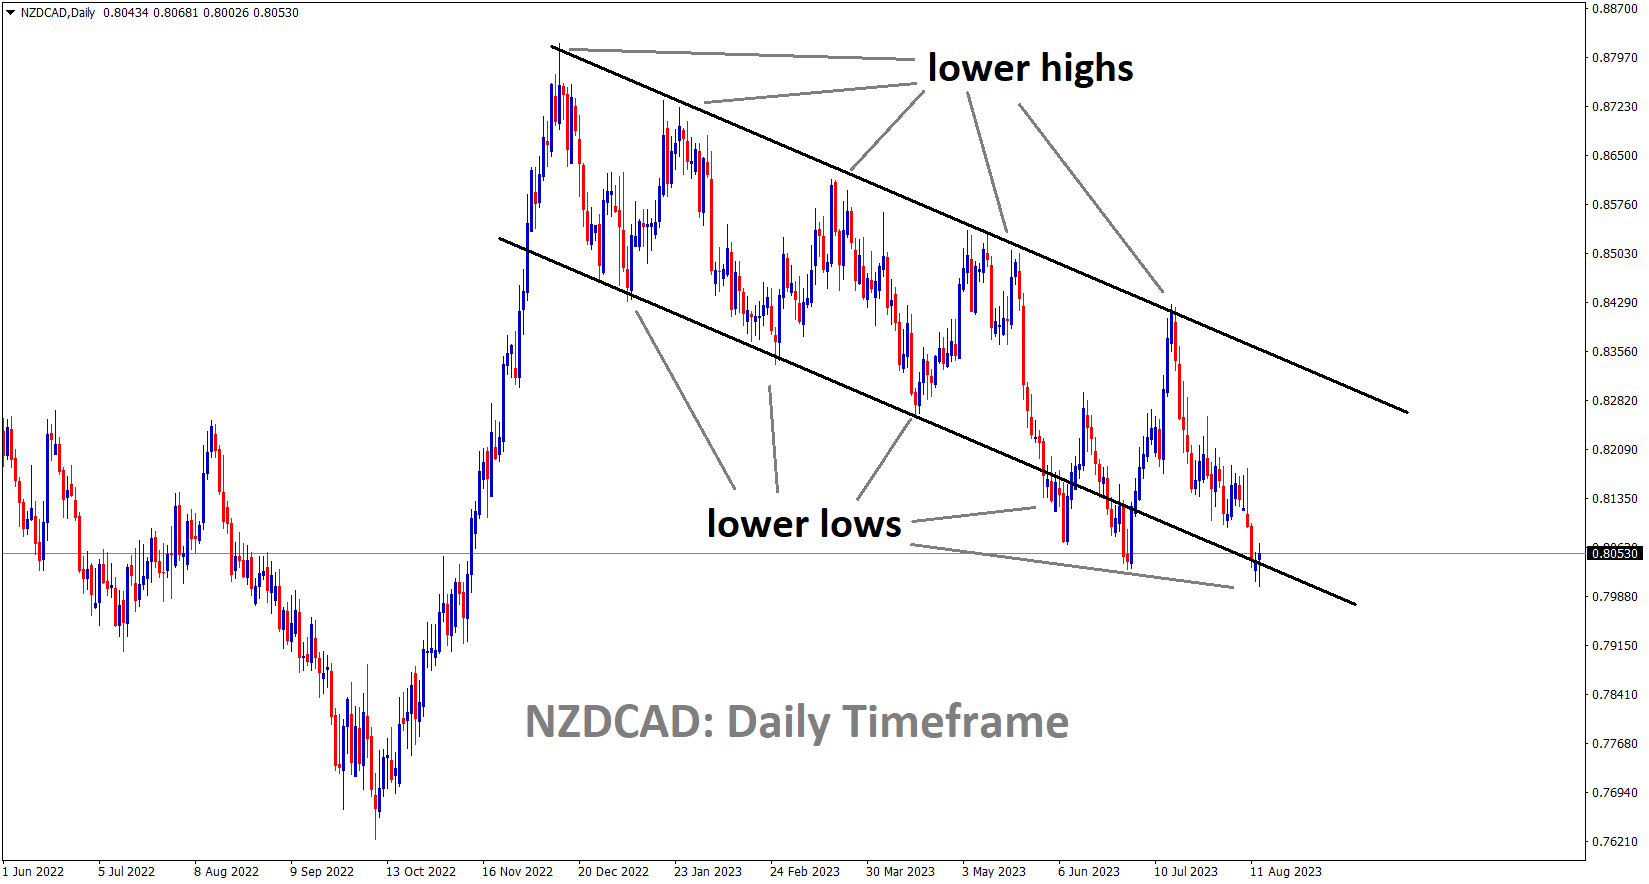 NZDCAD Daily TF Analysis Market is moving in the Descending channel and the market has reached the lower low area of the channel